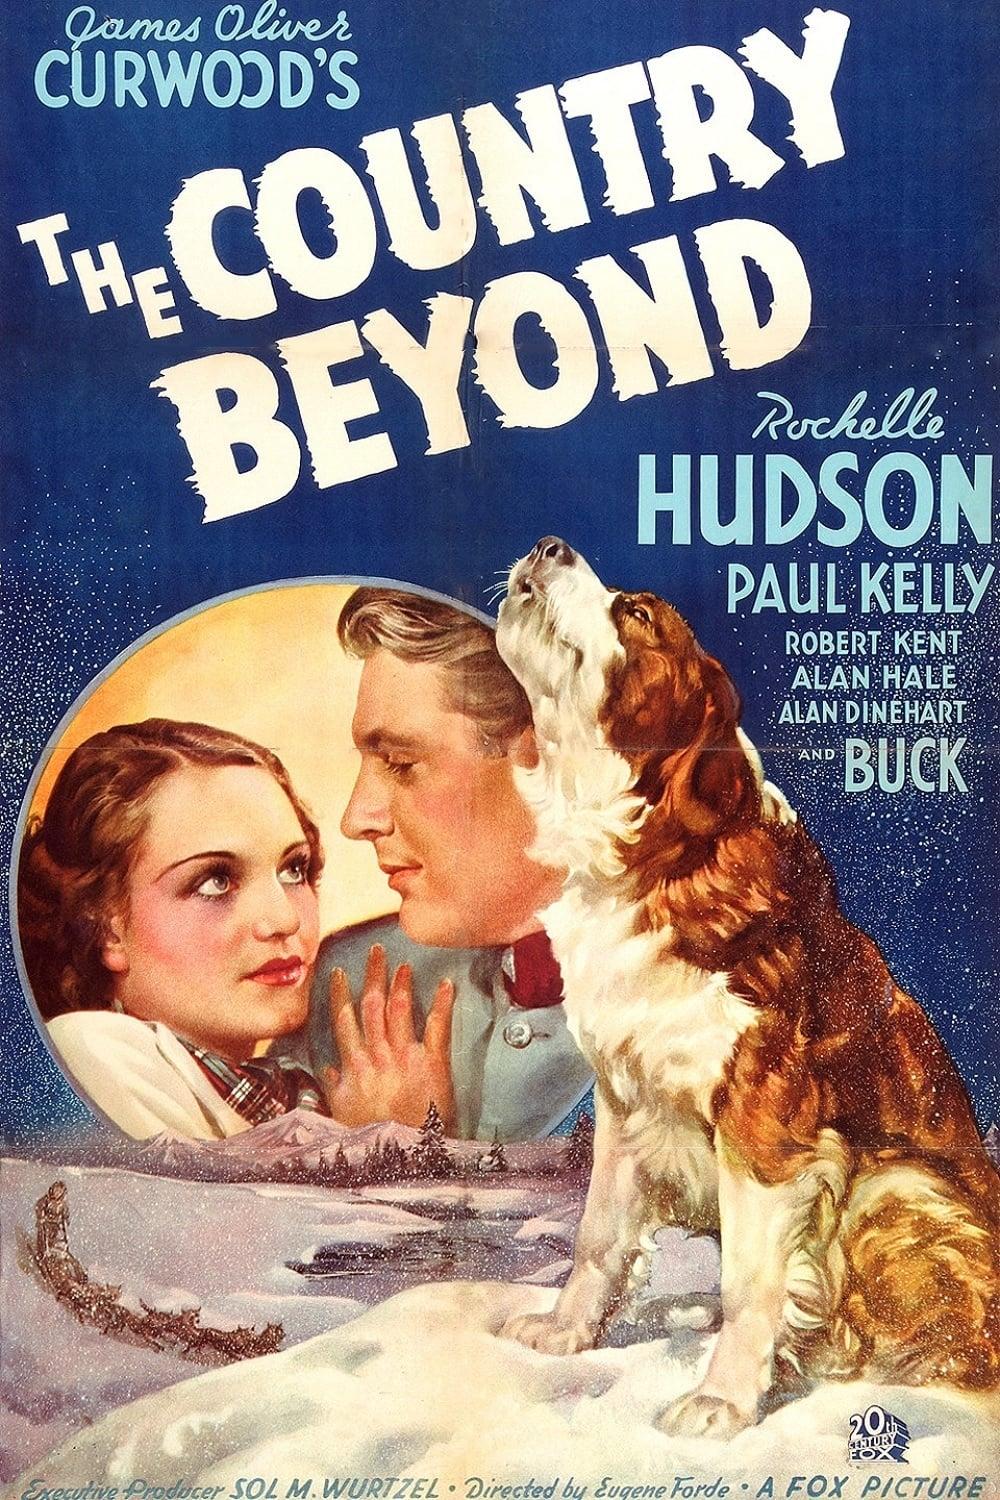 The Country Beyond poster